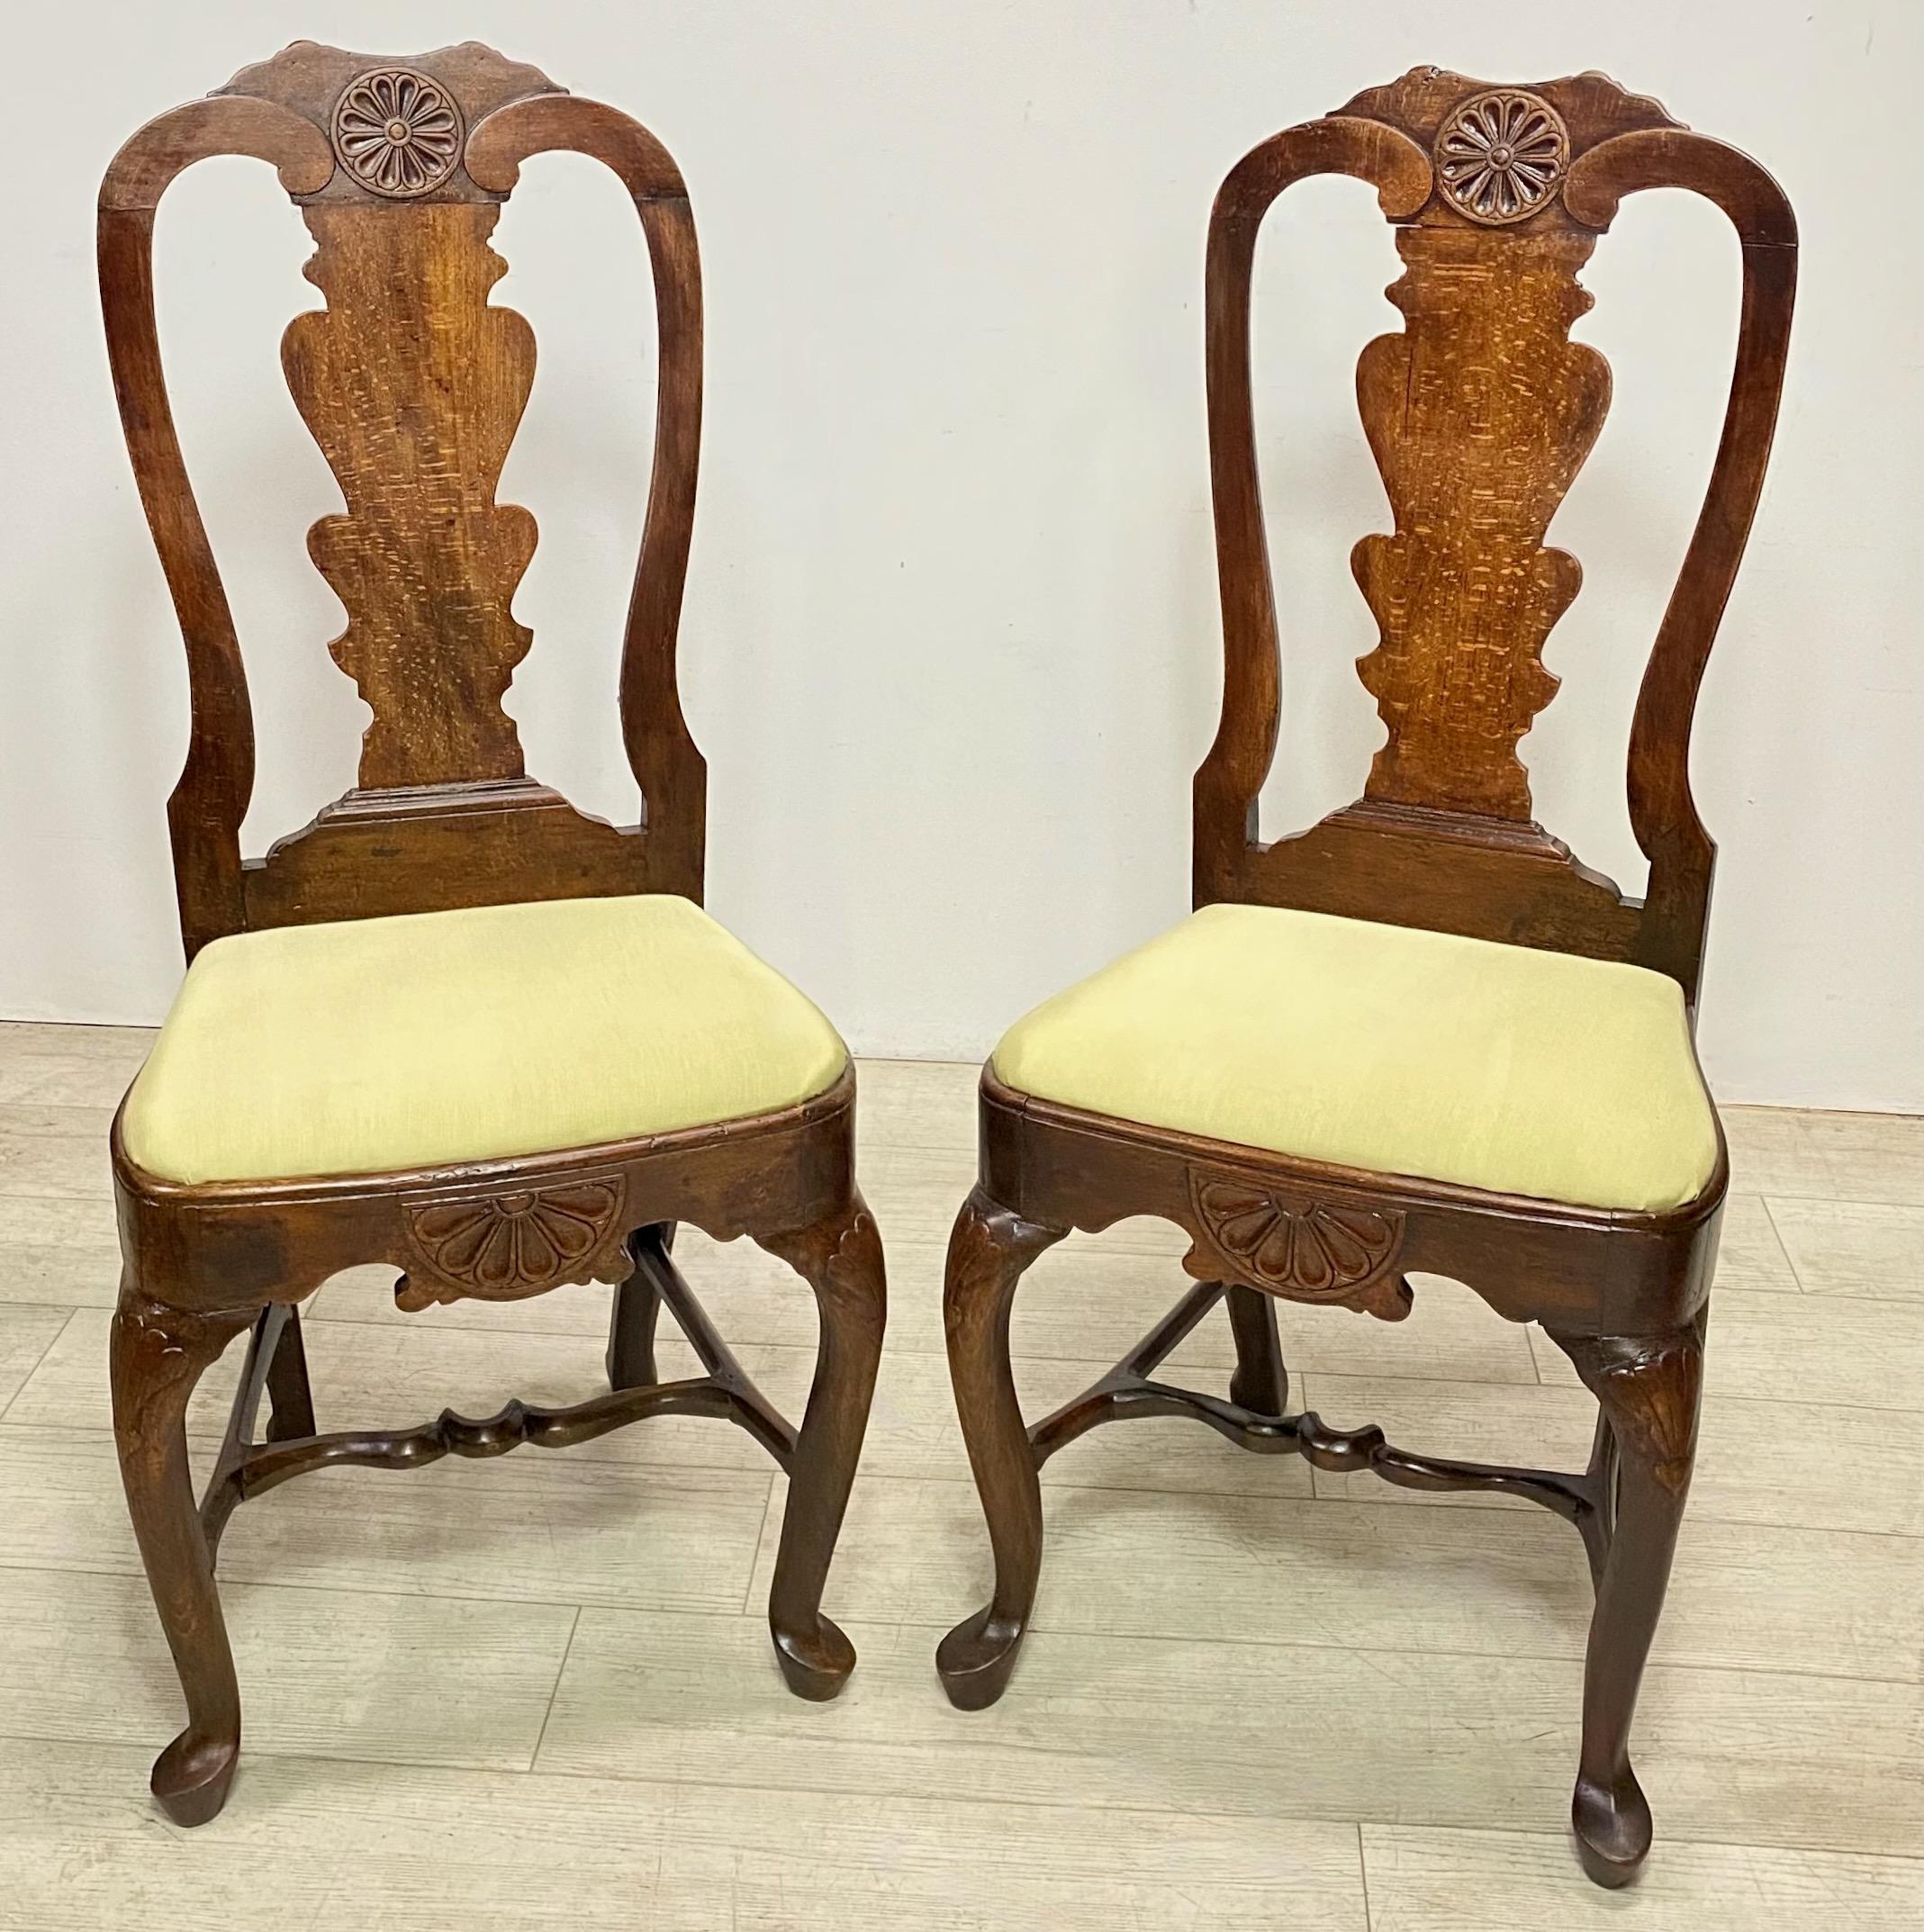 A pair of mid 18th century English or Dutch oak side chairs.
Recently refinished and upholstered.
Some professional old repairs but chairs are very sturdy and sound.